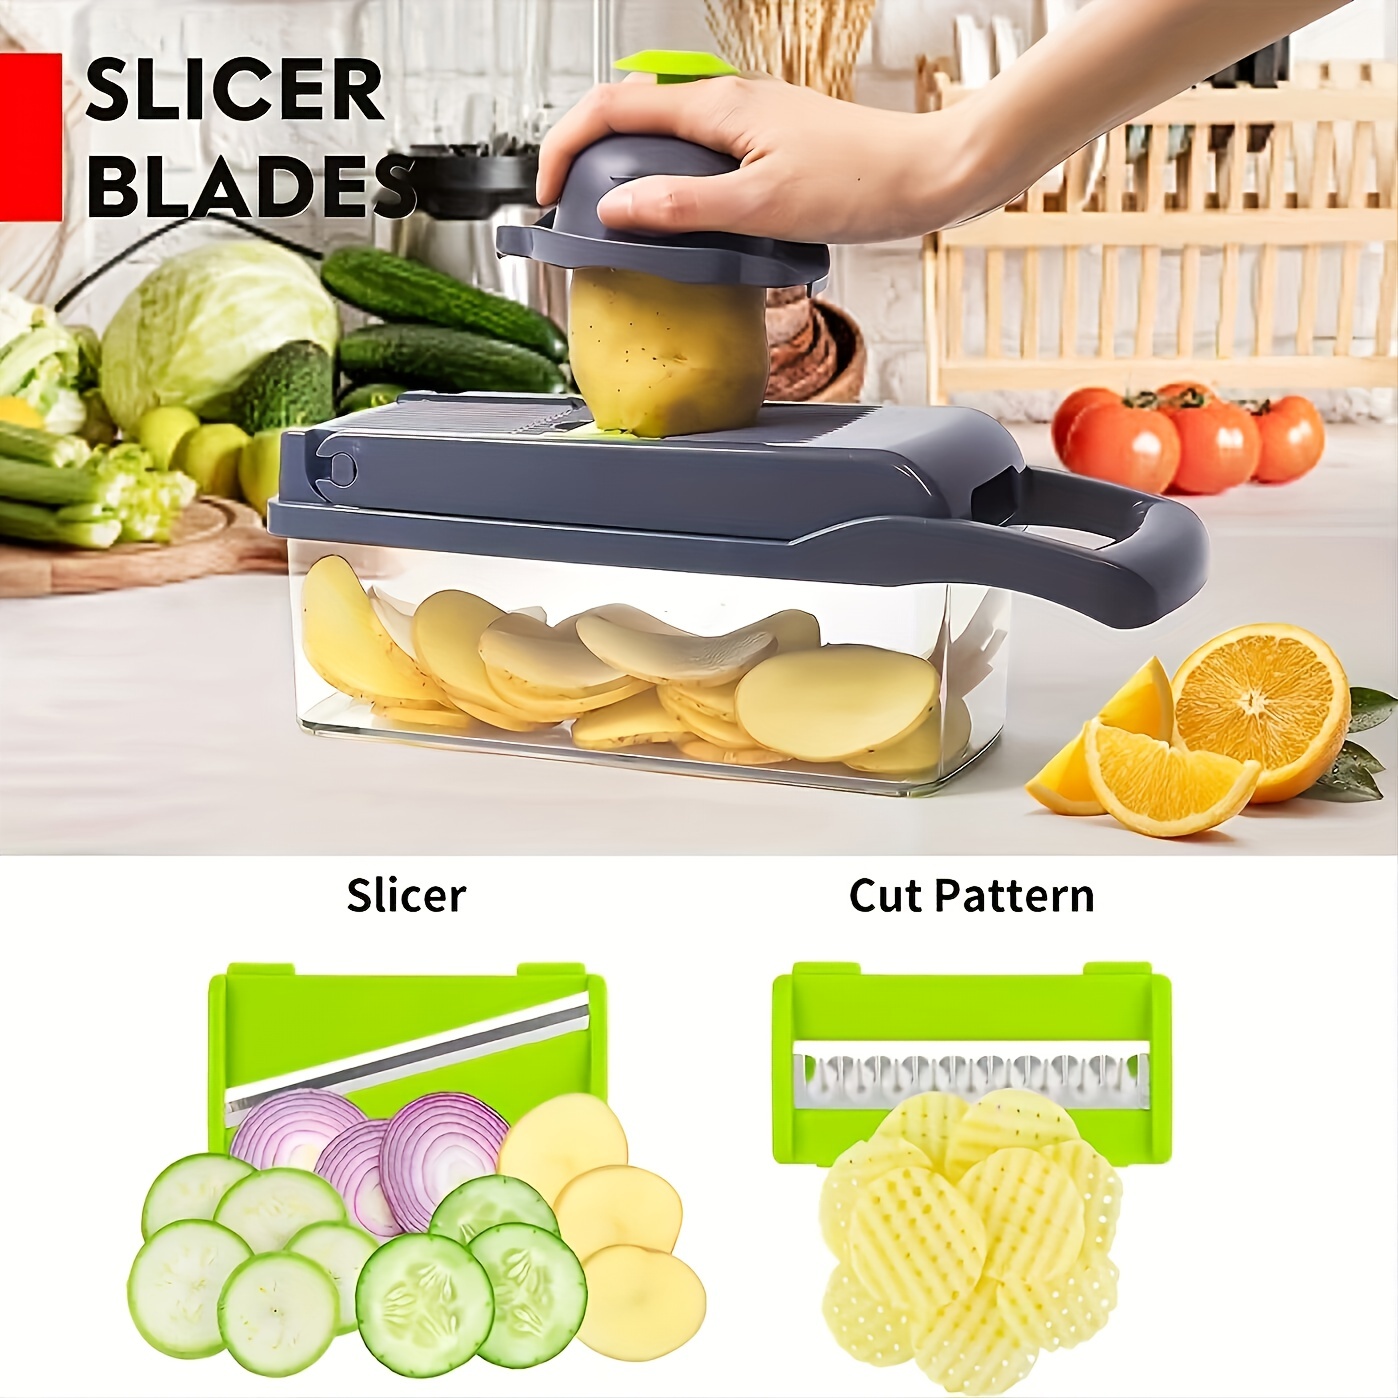  Vegetable Chopper, 14 in 1 Vegetable Cutter Onion